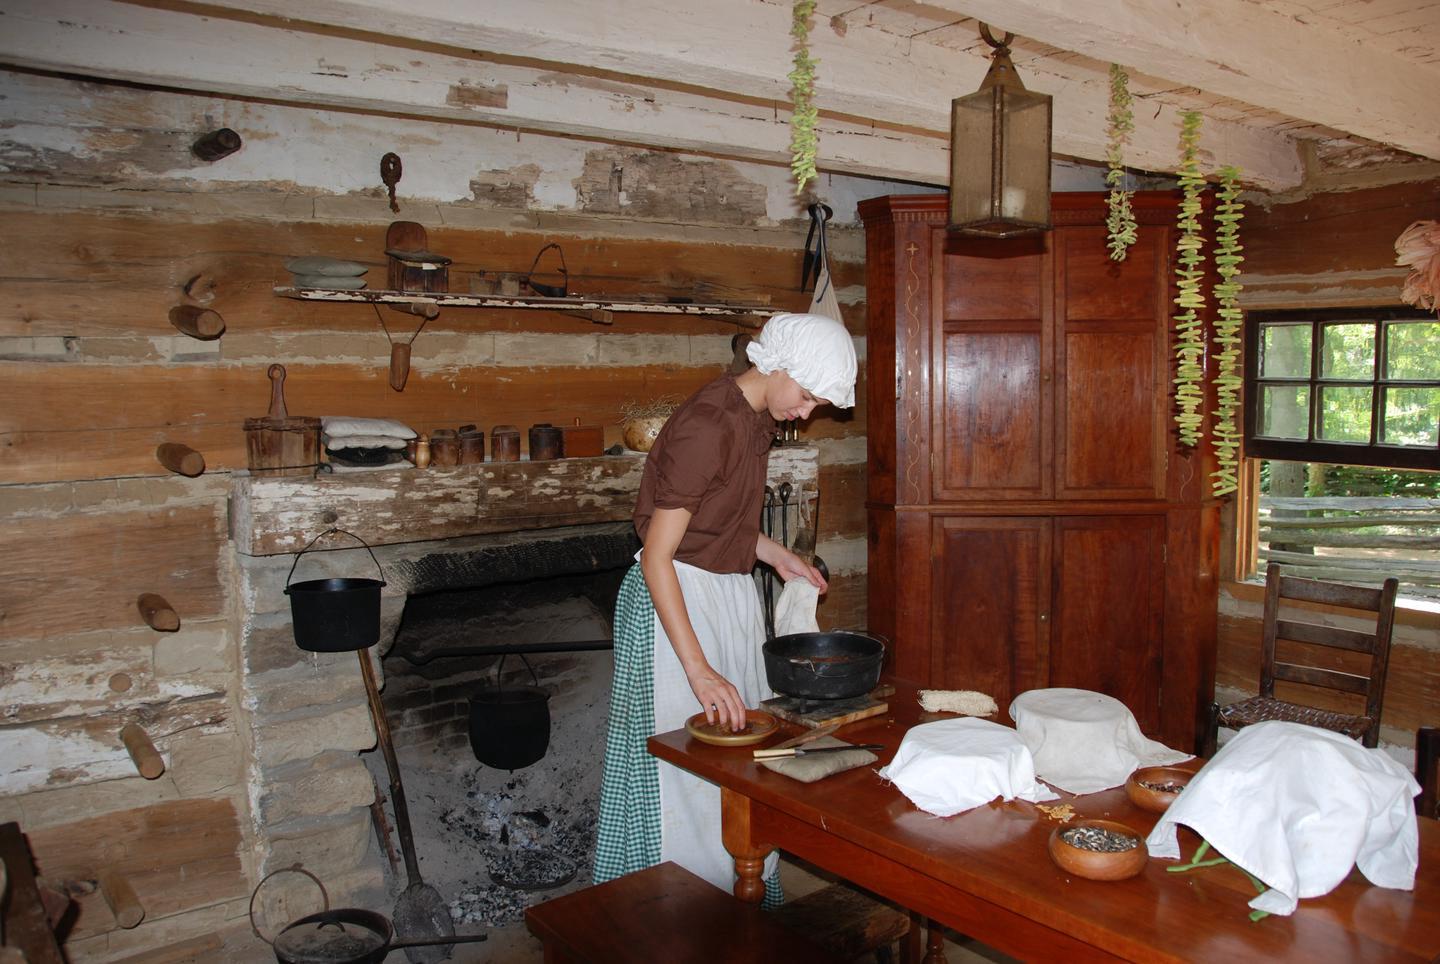 Cabin at Living Historical FarmPark rangers depict pioneer life in the 1820s.